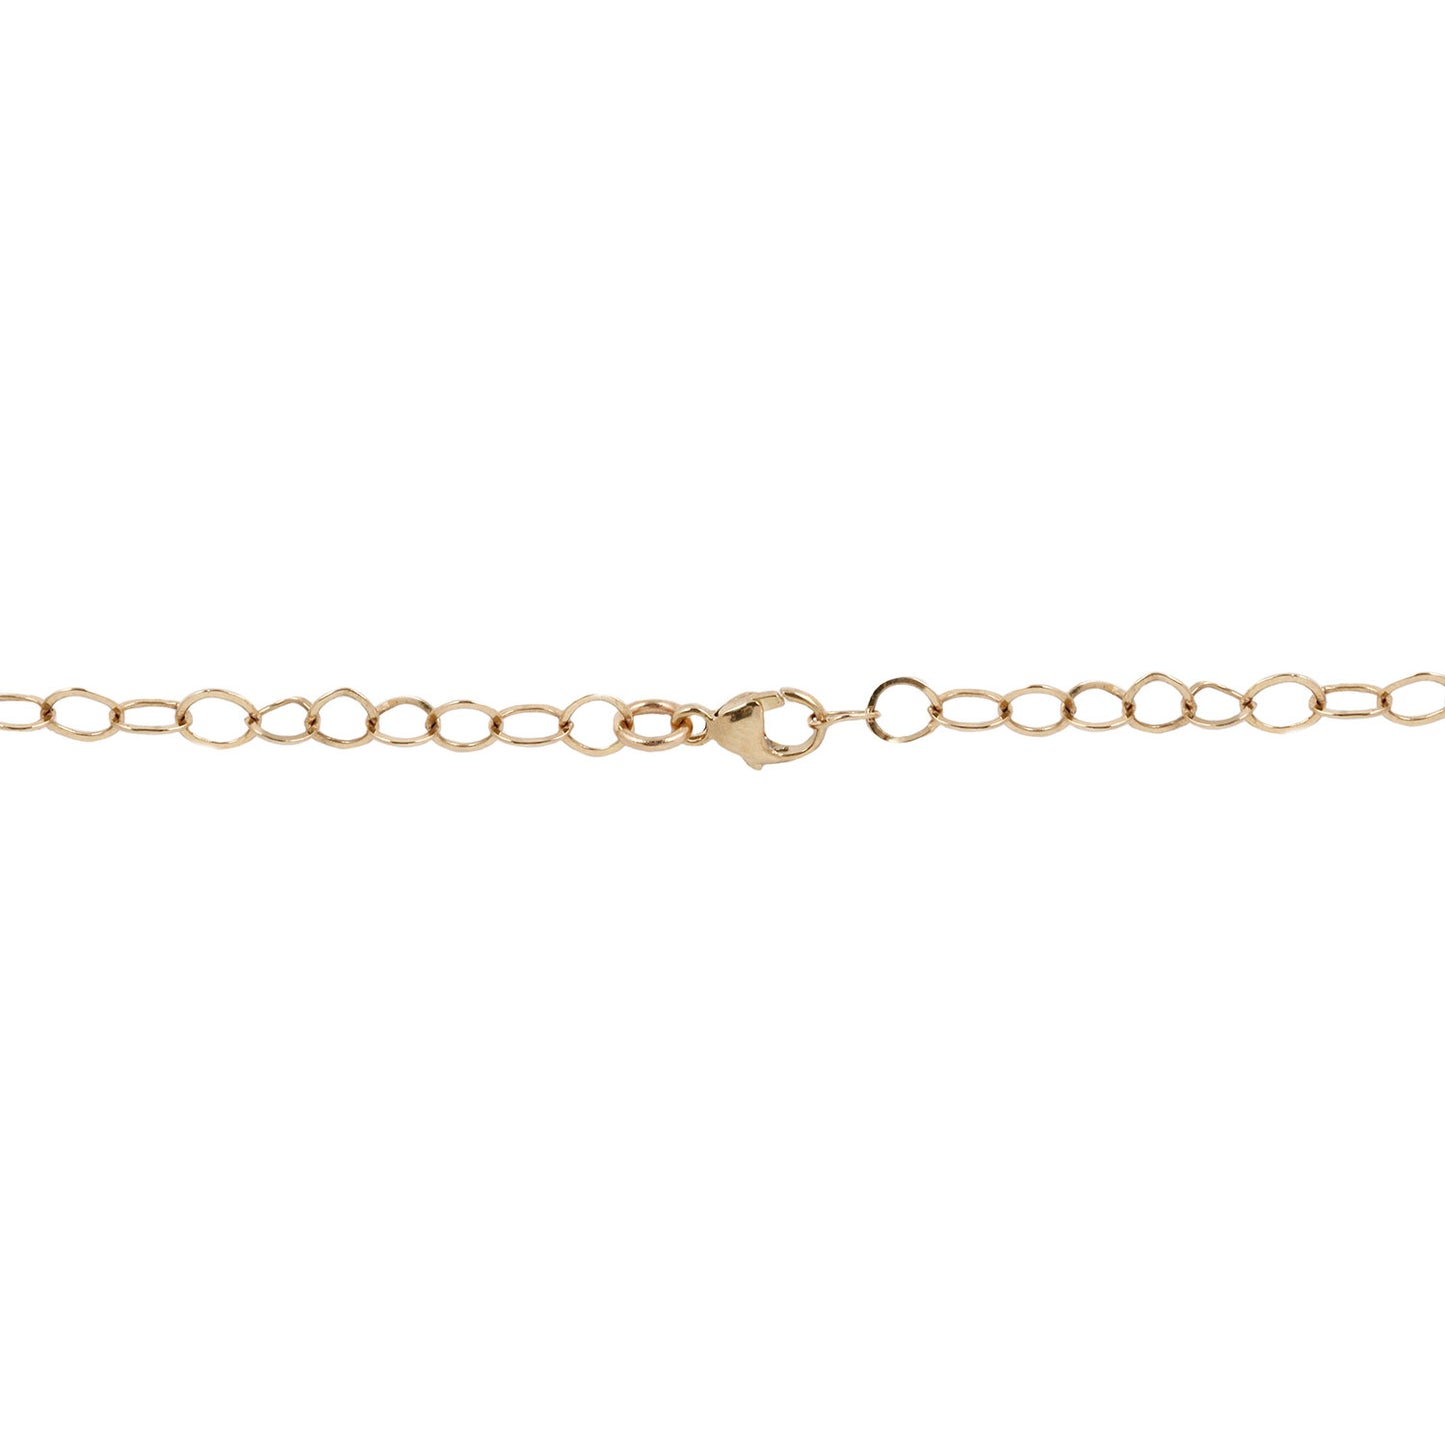 LI Small Forged Gold Link Necklace